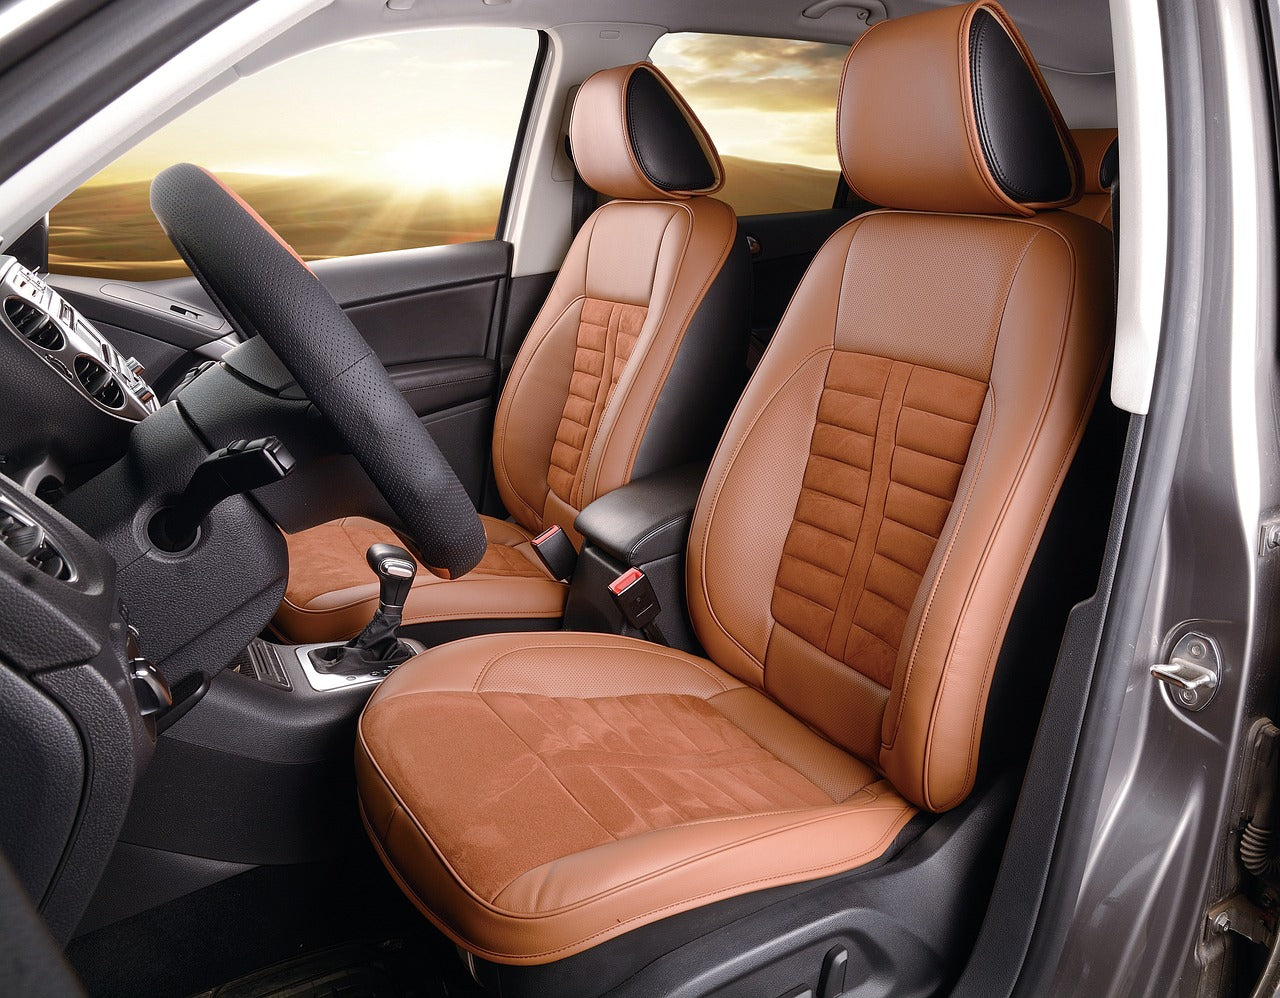 Brown seats in a car